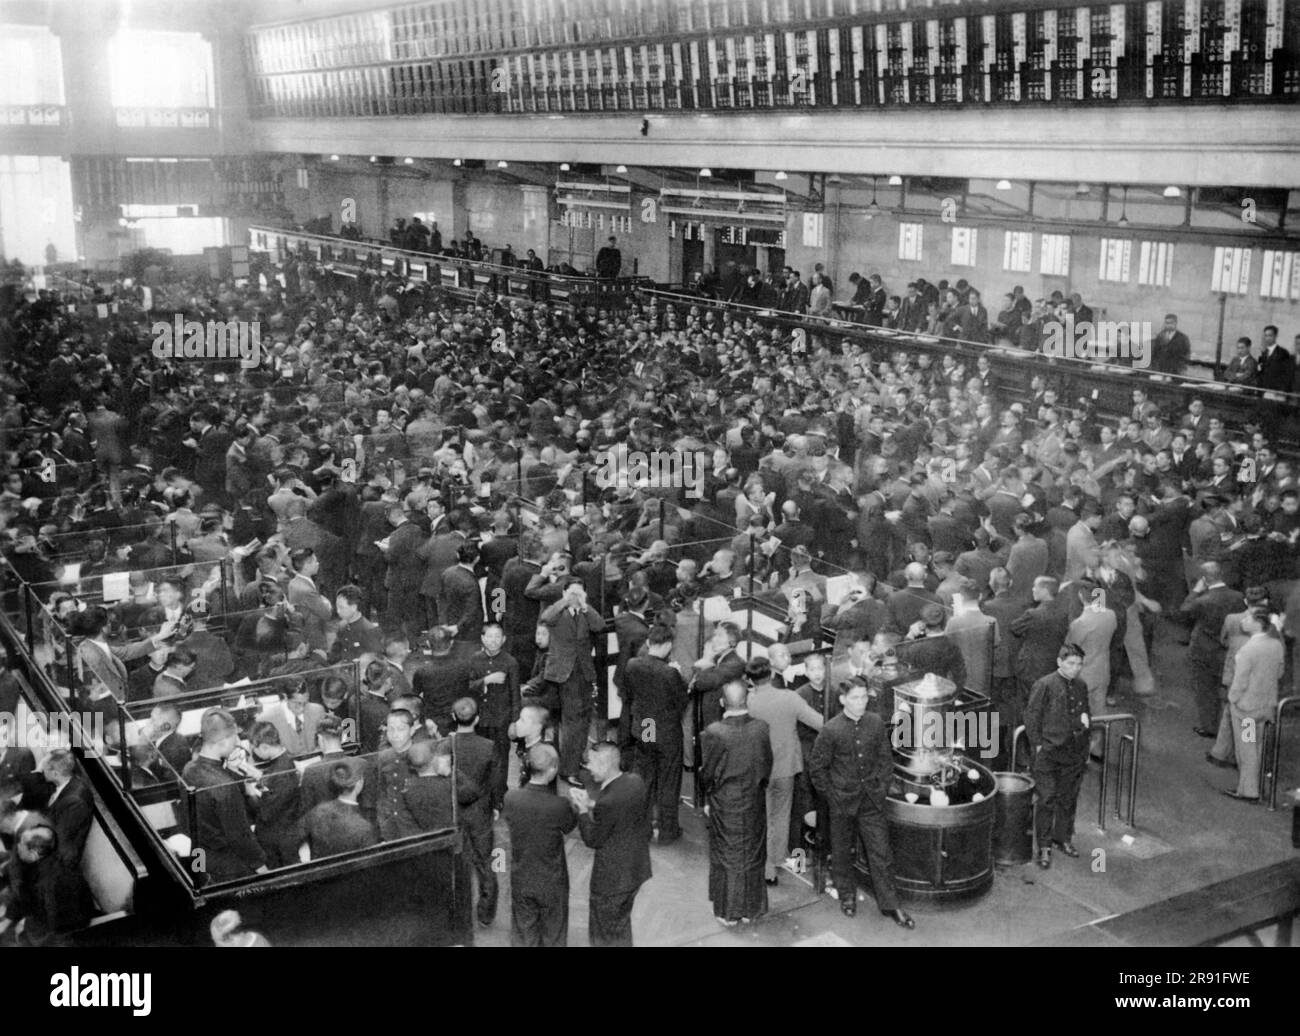 Tokyo, Japan:  November 26, 1932 The floor of the Tokyo Stock Exchange. The markets there boomed following the election of Franklin D. Roosevelt. Stock Photo